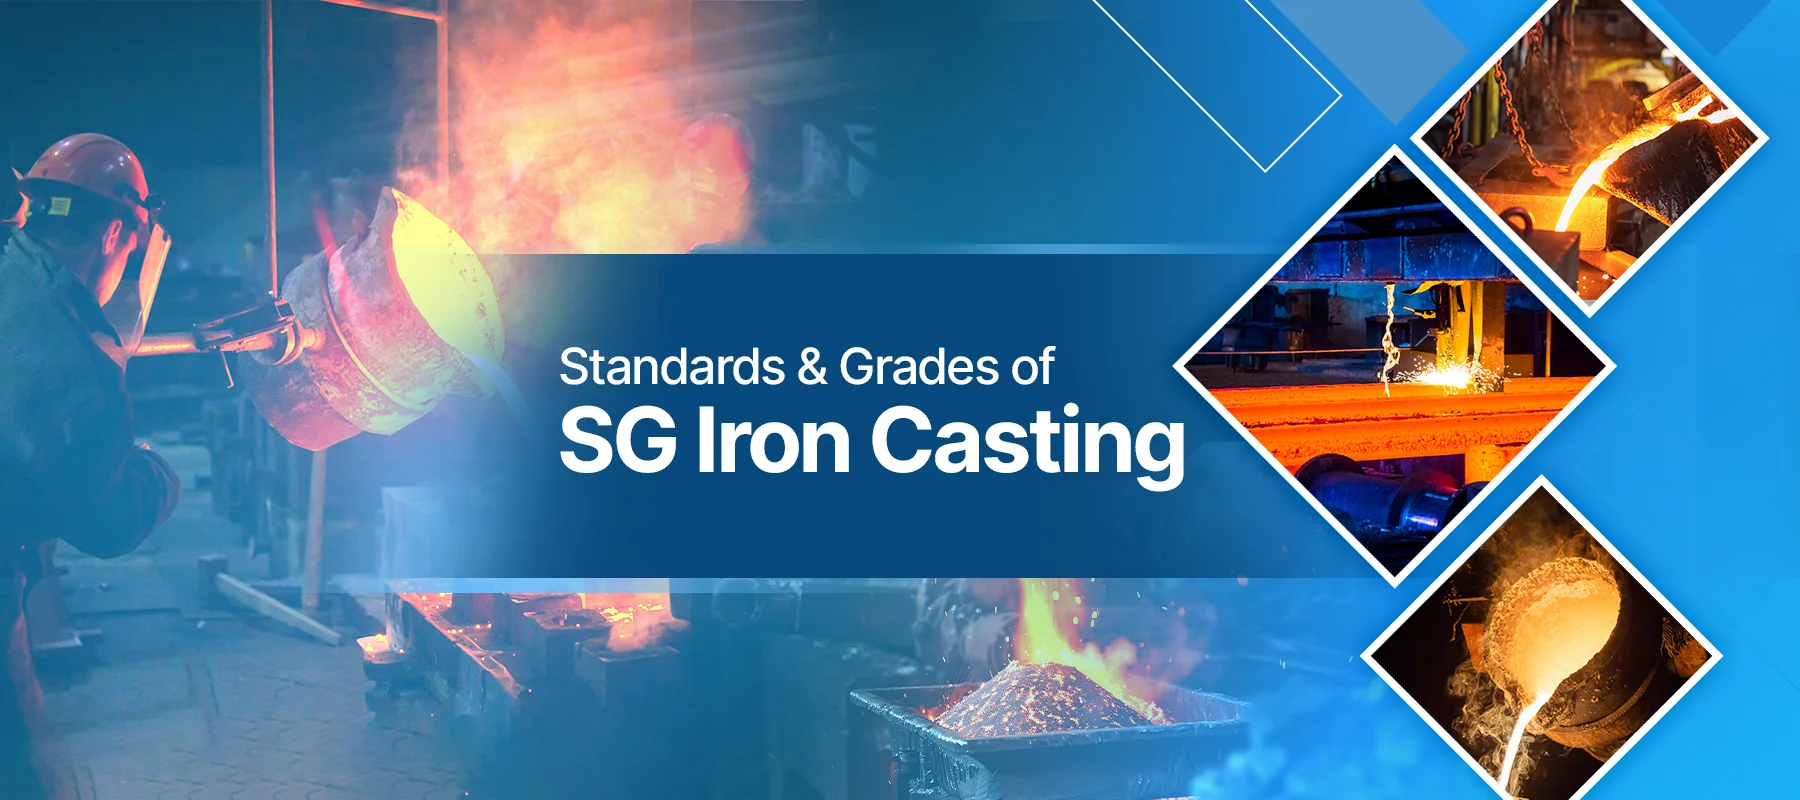 Standards and Grades of SG Iron Casting